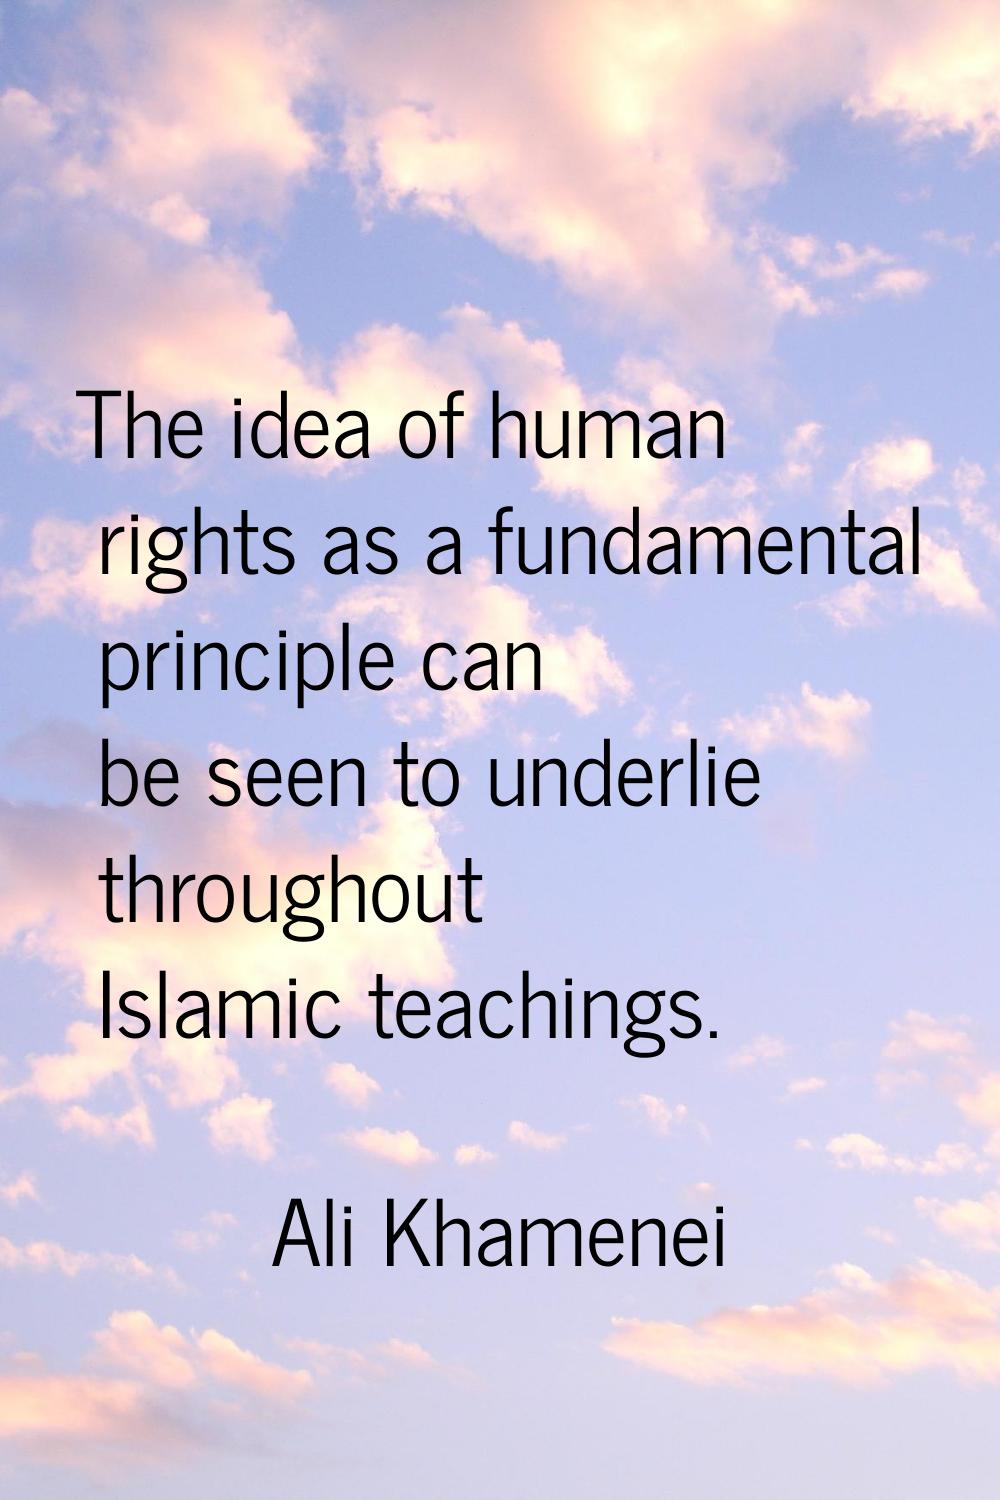 The idea of human rights as a fundamental principle can be seen to underlie throughout Islamic teac